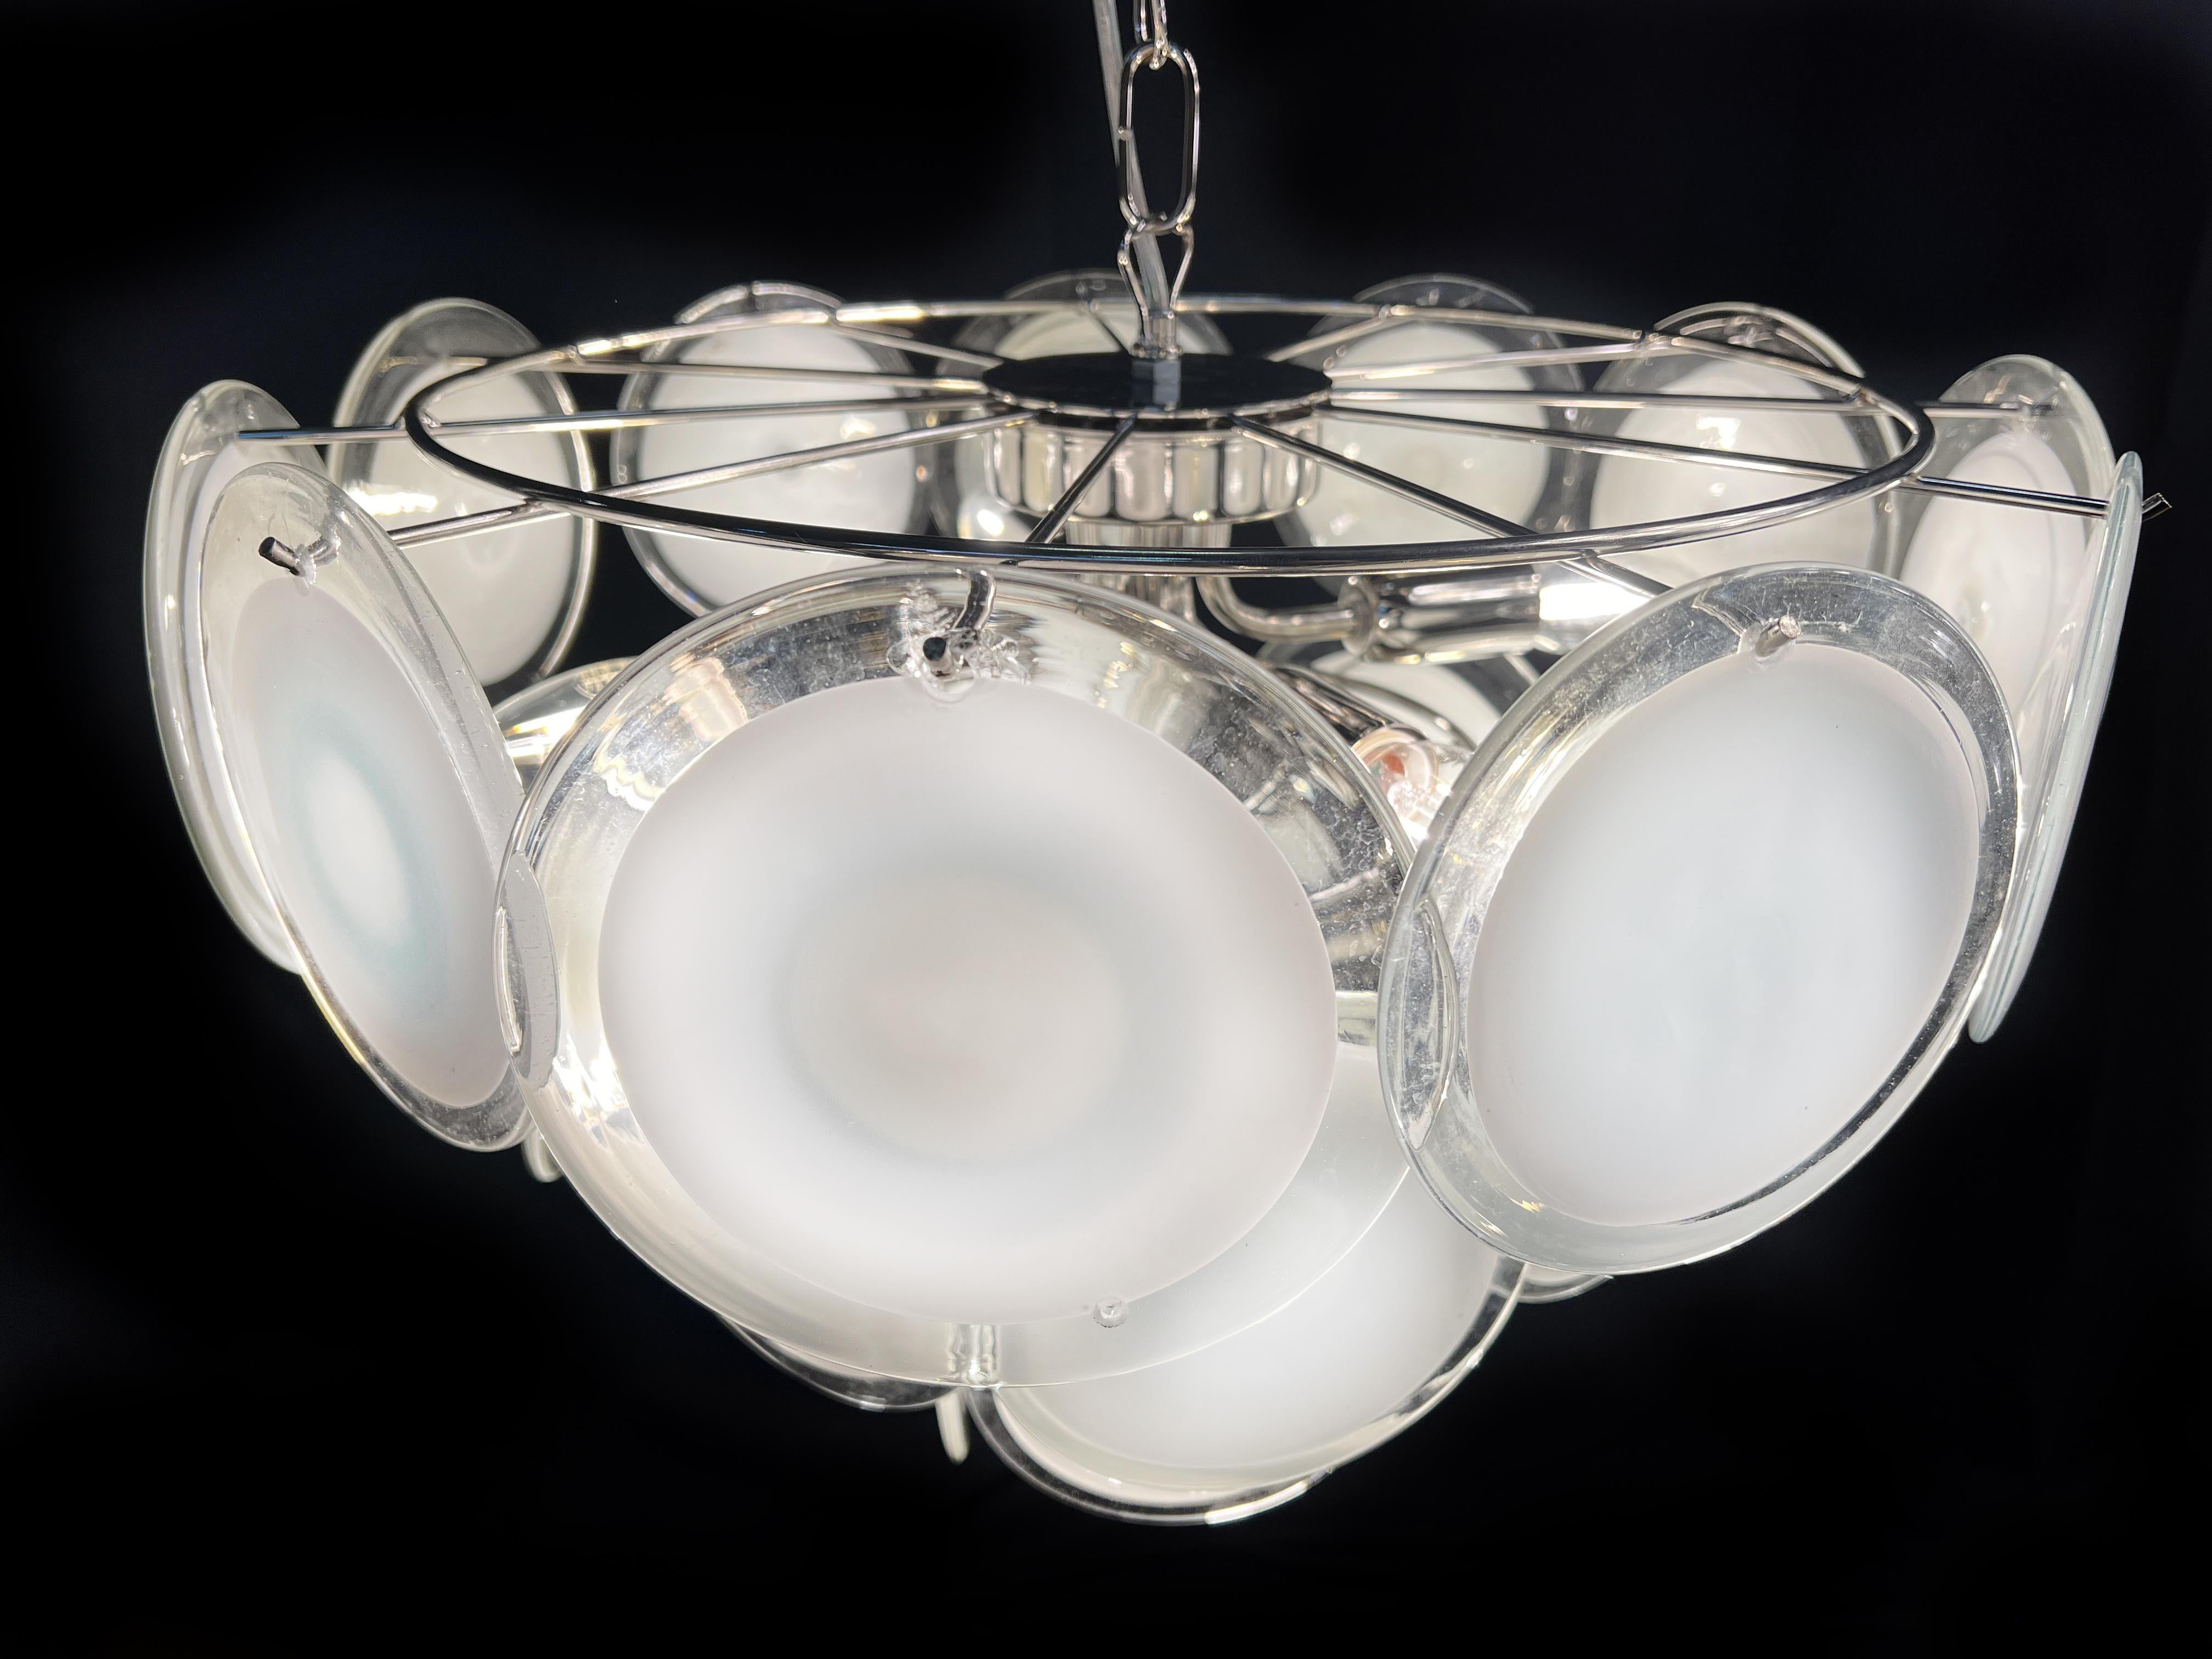 Vintage Italian Murano chandelier by Vistosi. The chandelier has 23 fantastic  white discs in a nickel metal frame.
Period: late XX century
Dimensions: 44,50 inches (150 cm) height with chain; 19,40 inches (50 cm) height without chain; 19,40 inches